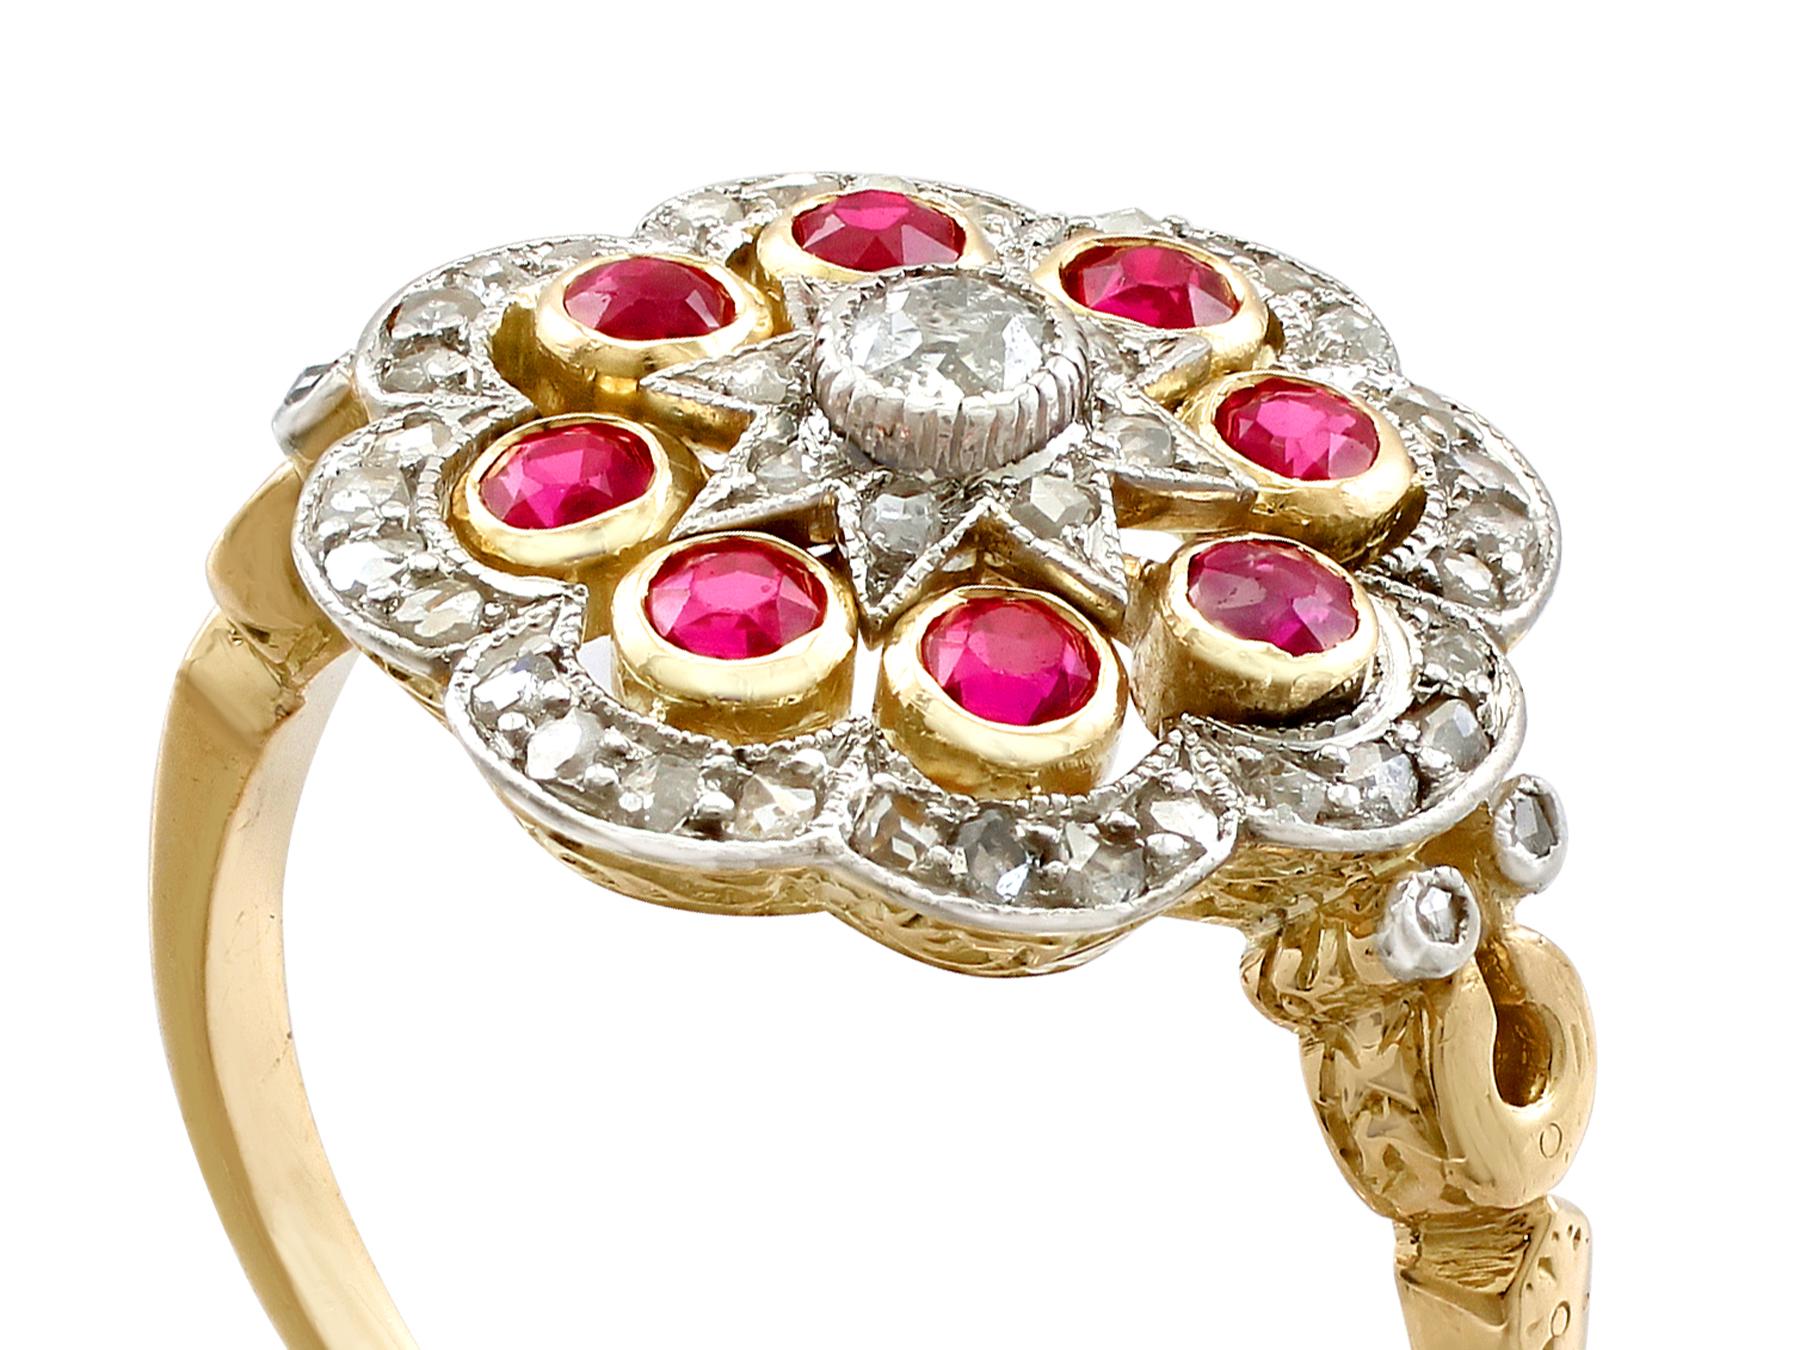 An impressive antique French 0.75 carat ruby and 0.52 carat diamond, 18 karat yellow gold and platinum set dress ring; part of our diverse antique jewelry and estate jewelry collections.

This fine and impressive antique ruby ring has been crafted